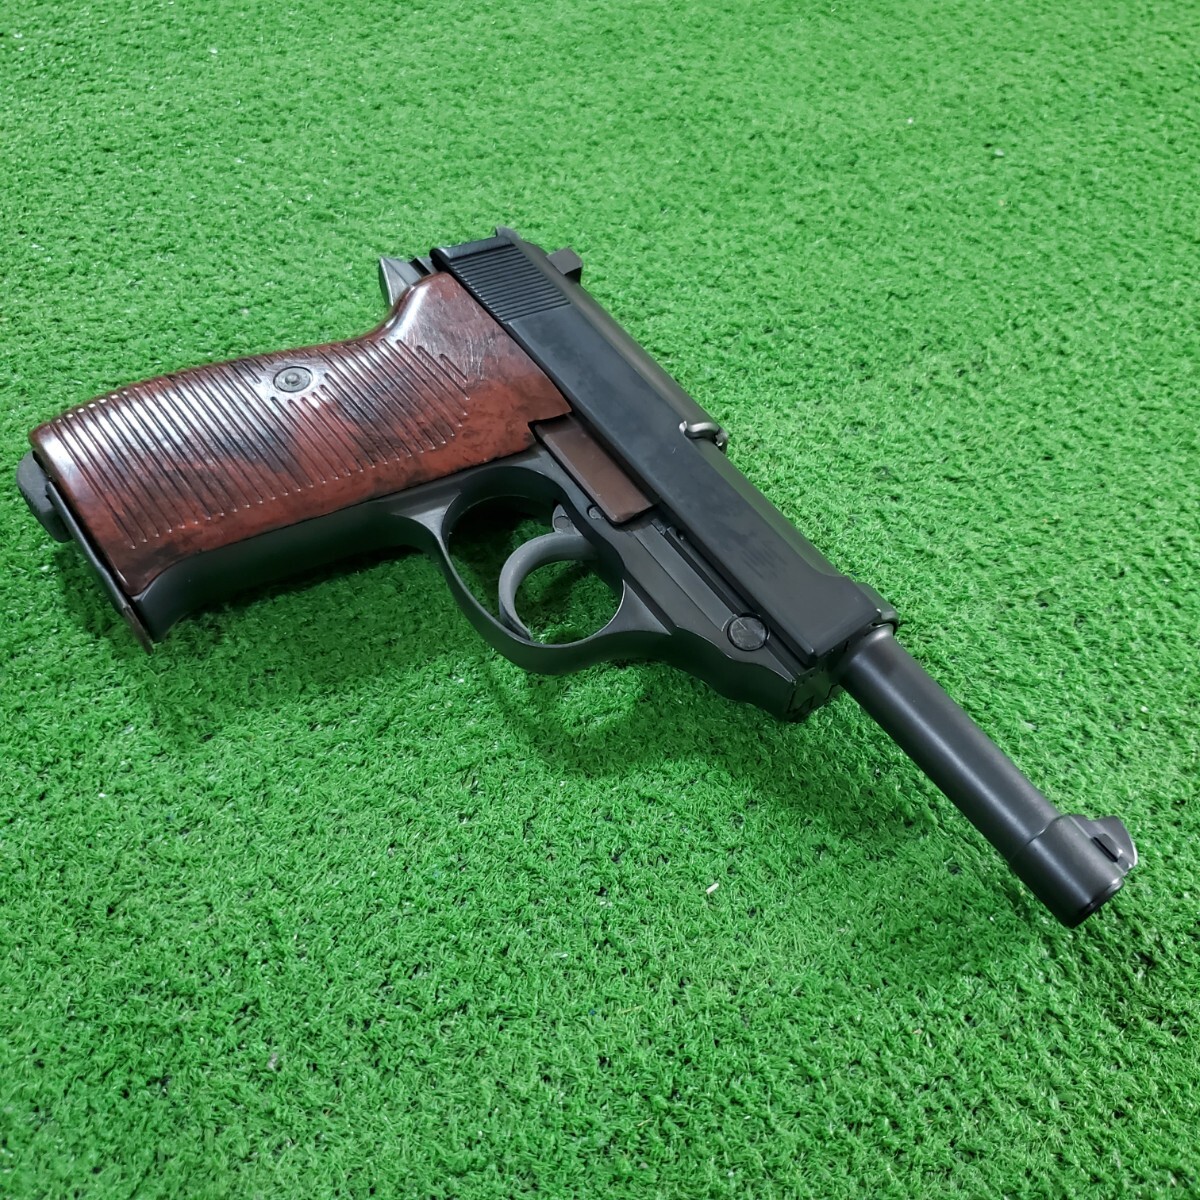 warusa-P38 WALTHER P38 model gun collection antique box equipped 